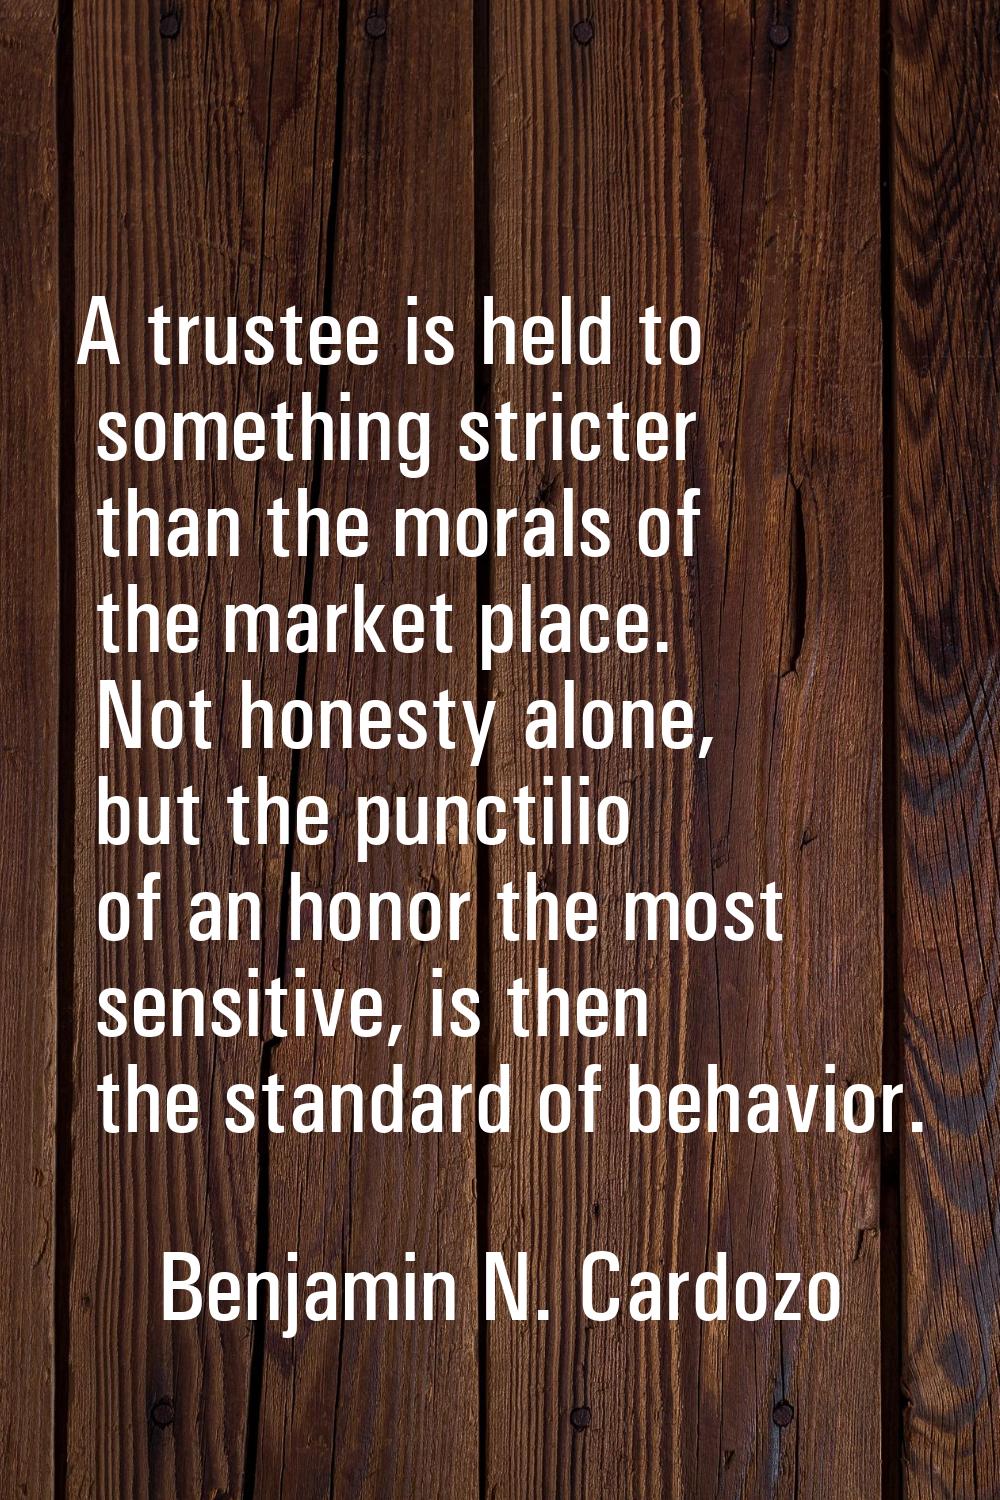 A trustee is held to something stricter than the morals of the market place. Not honesty alone, but